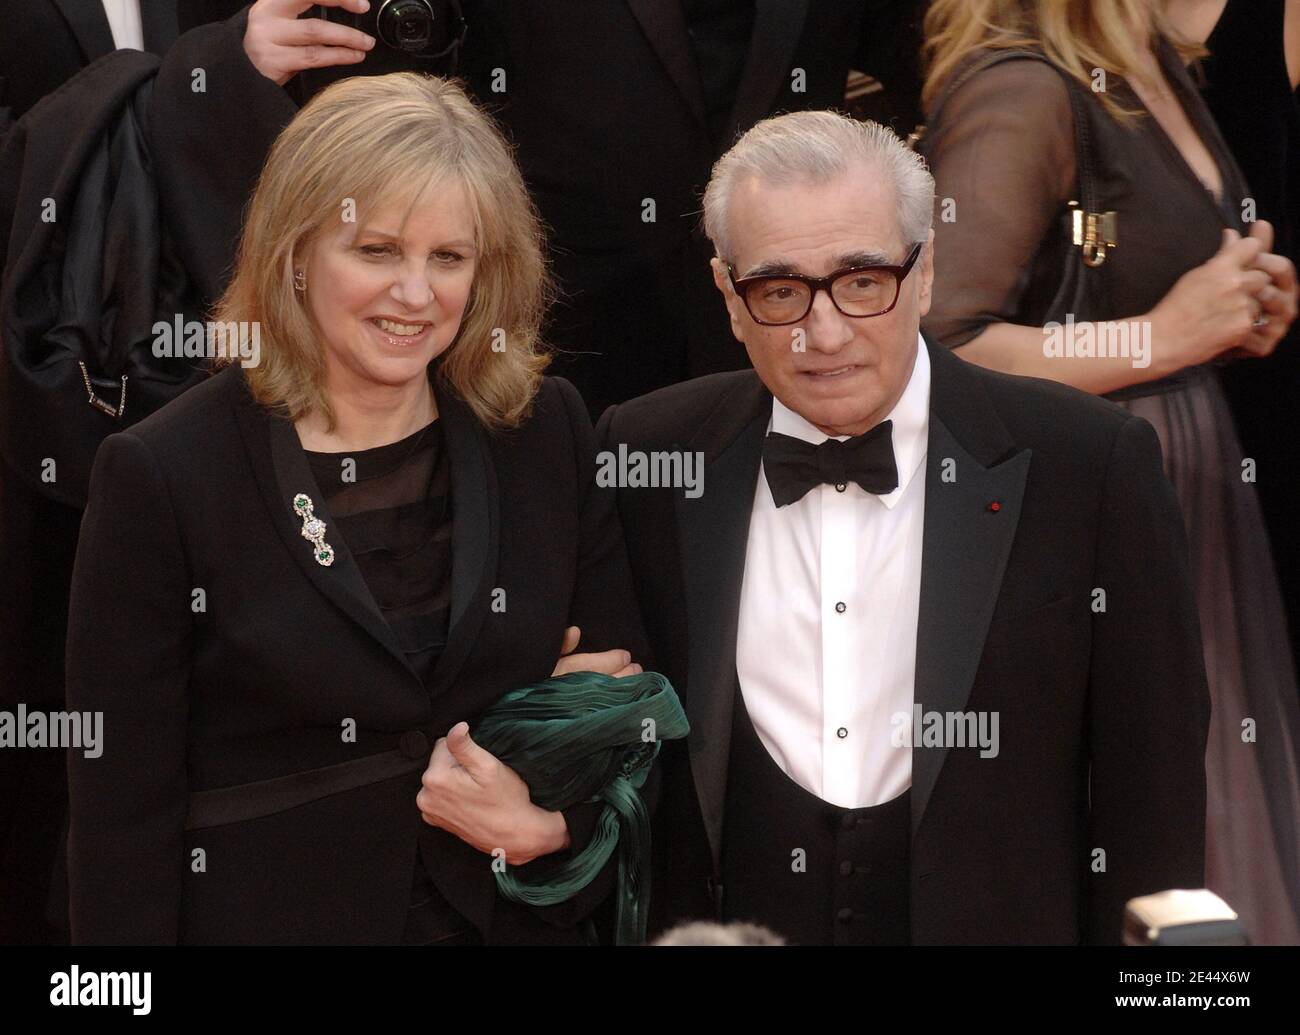 Helen Morris and Martin Scorsese arriving to the screening of 'Bright Star' during the 62nd Cannes Film Festival at the Palais des Festivals in Cannes, France on May 15, 2009. Photo by Gorassini-Guignebourg/ABACAPRESS.COM Stock Photo